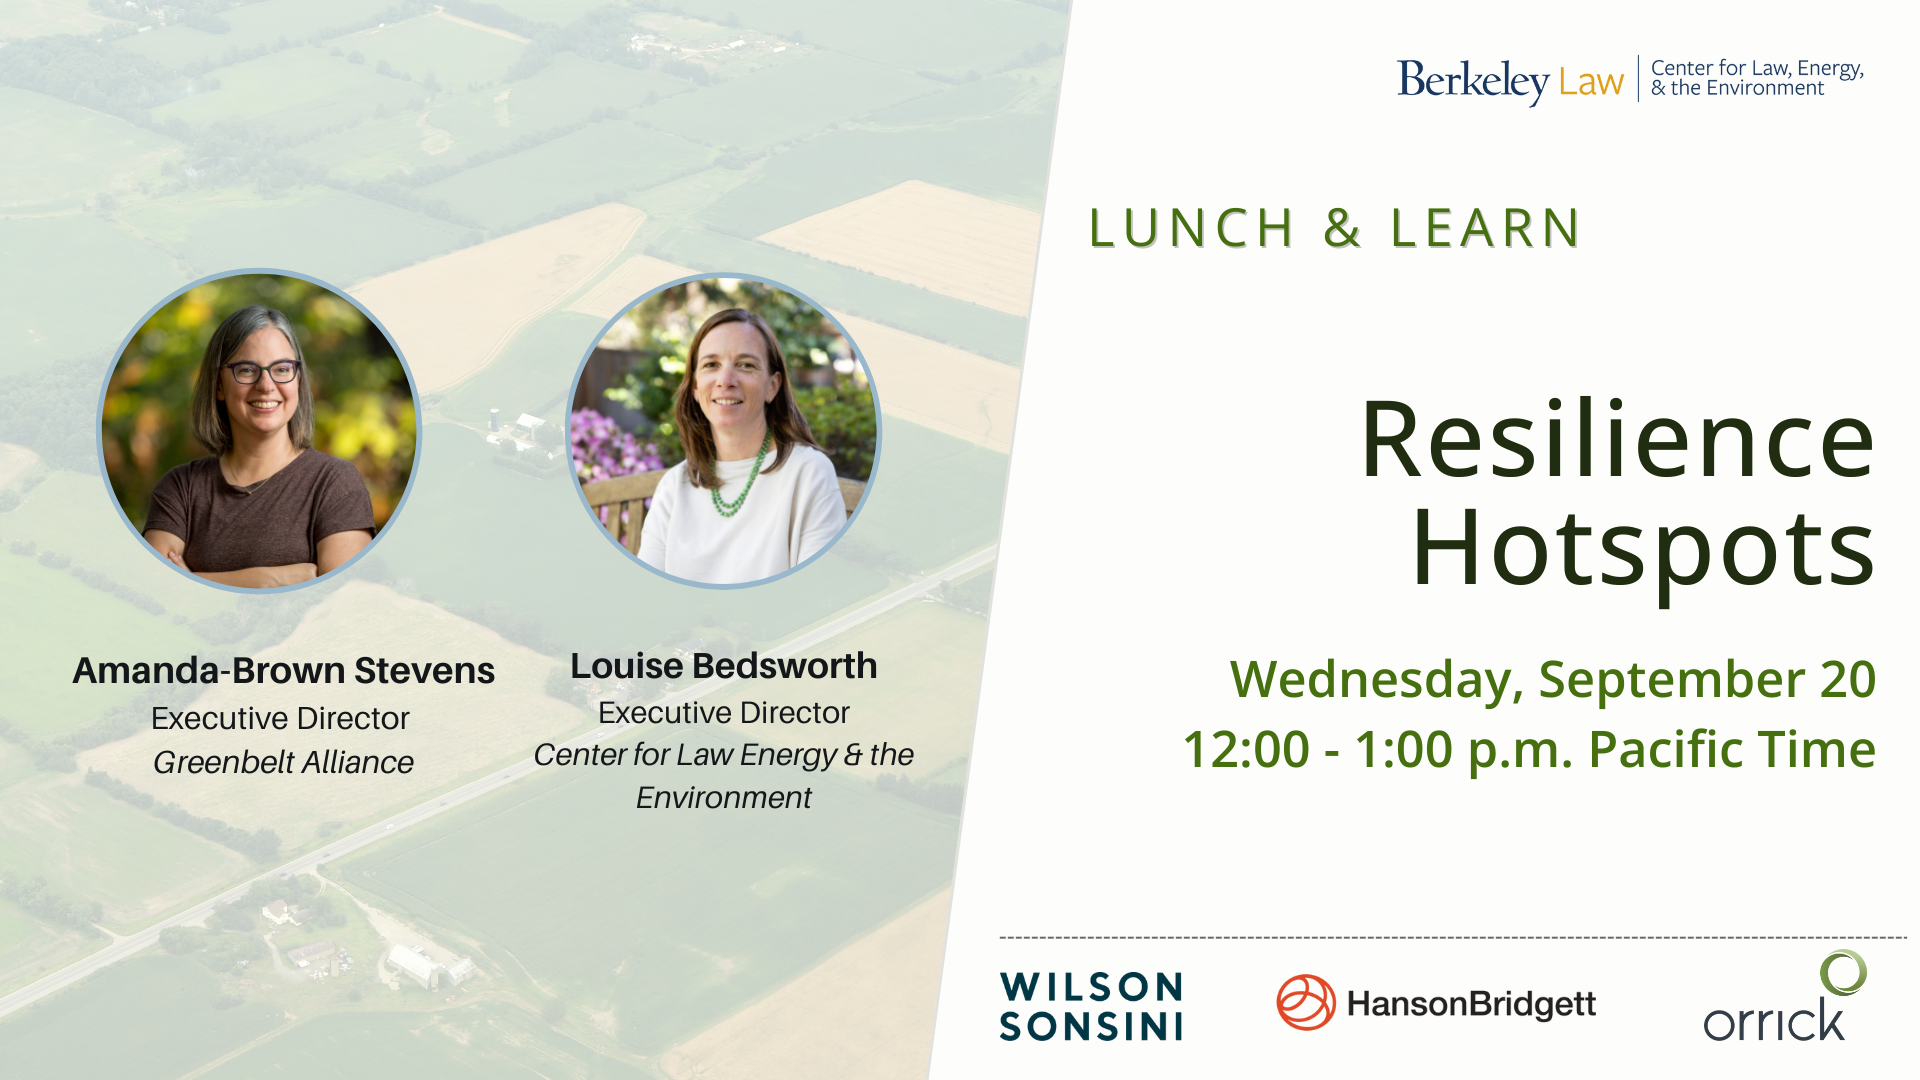 Flyer with agricultural land background, with panelist headshots of Amanda Brown-Stevens and Louise Bedsworth. Includes event title, location, and sponsor logos. Text description below.